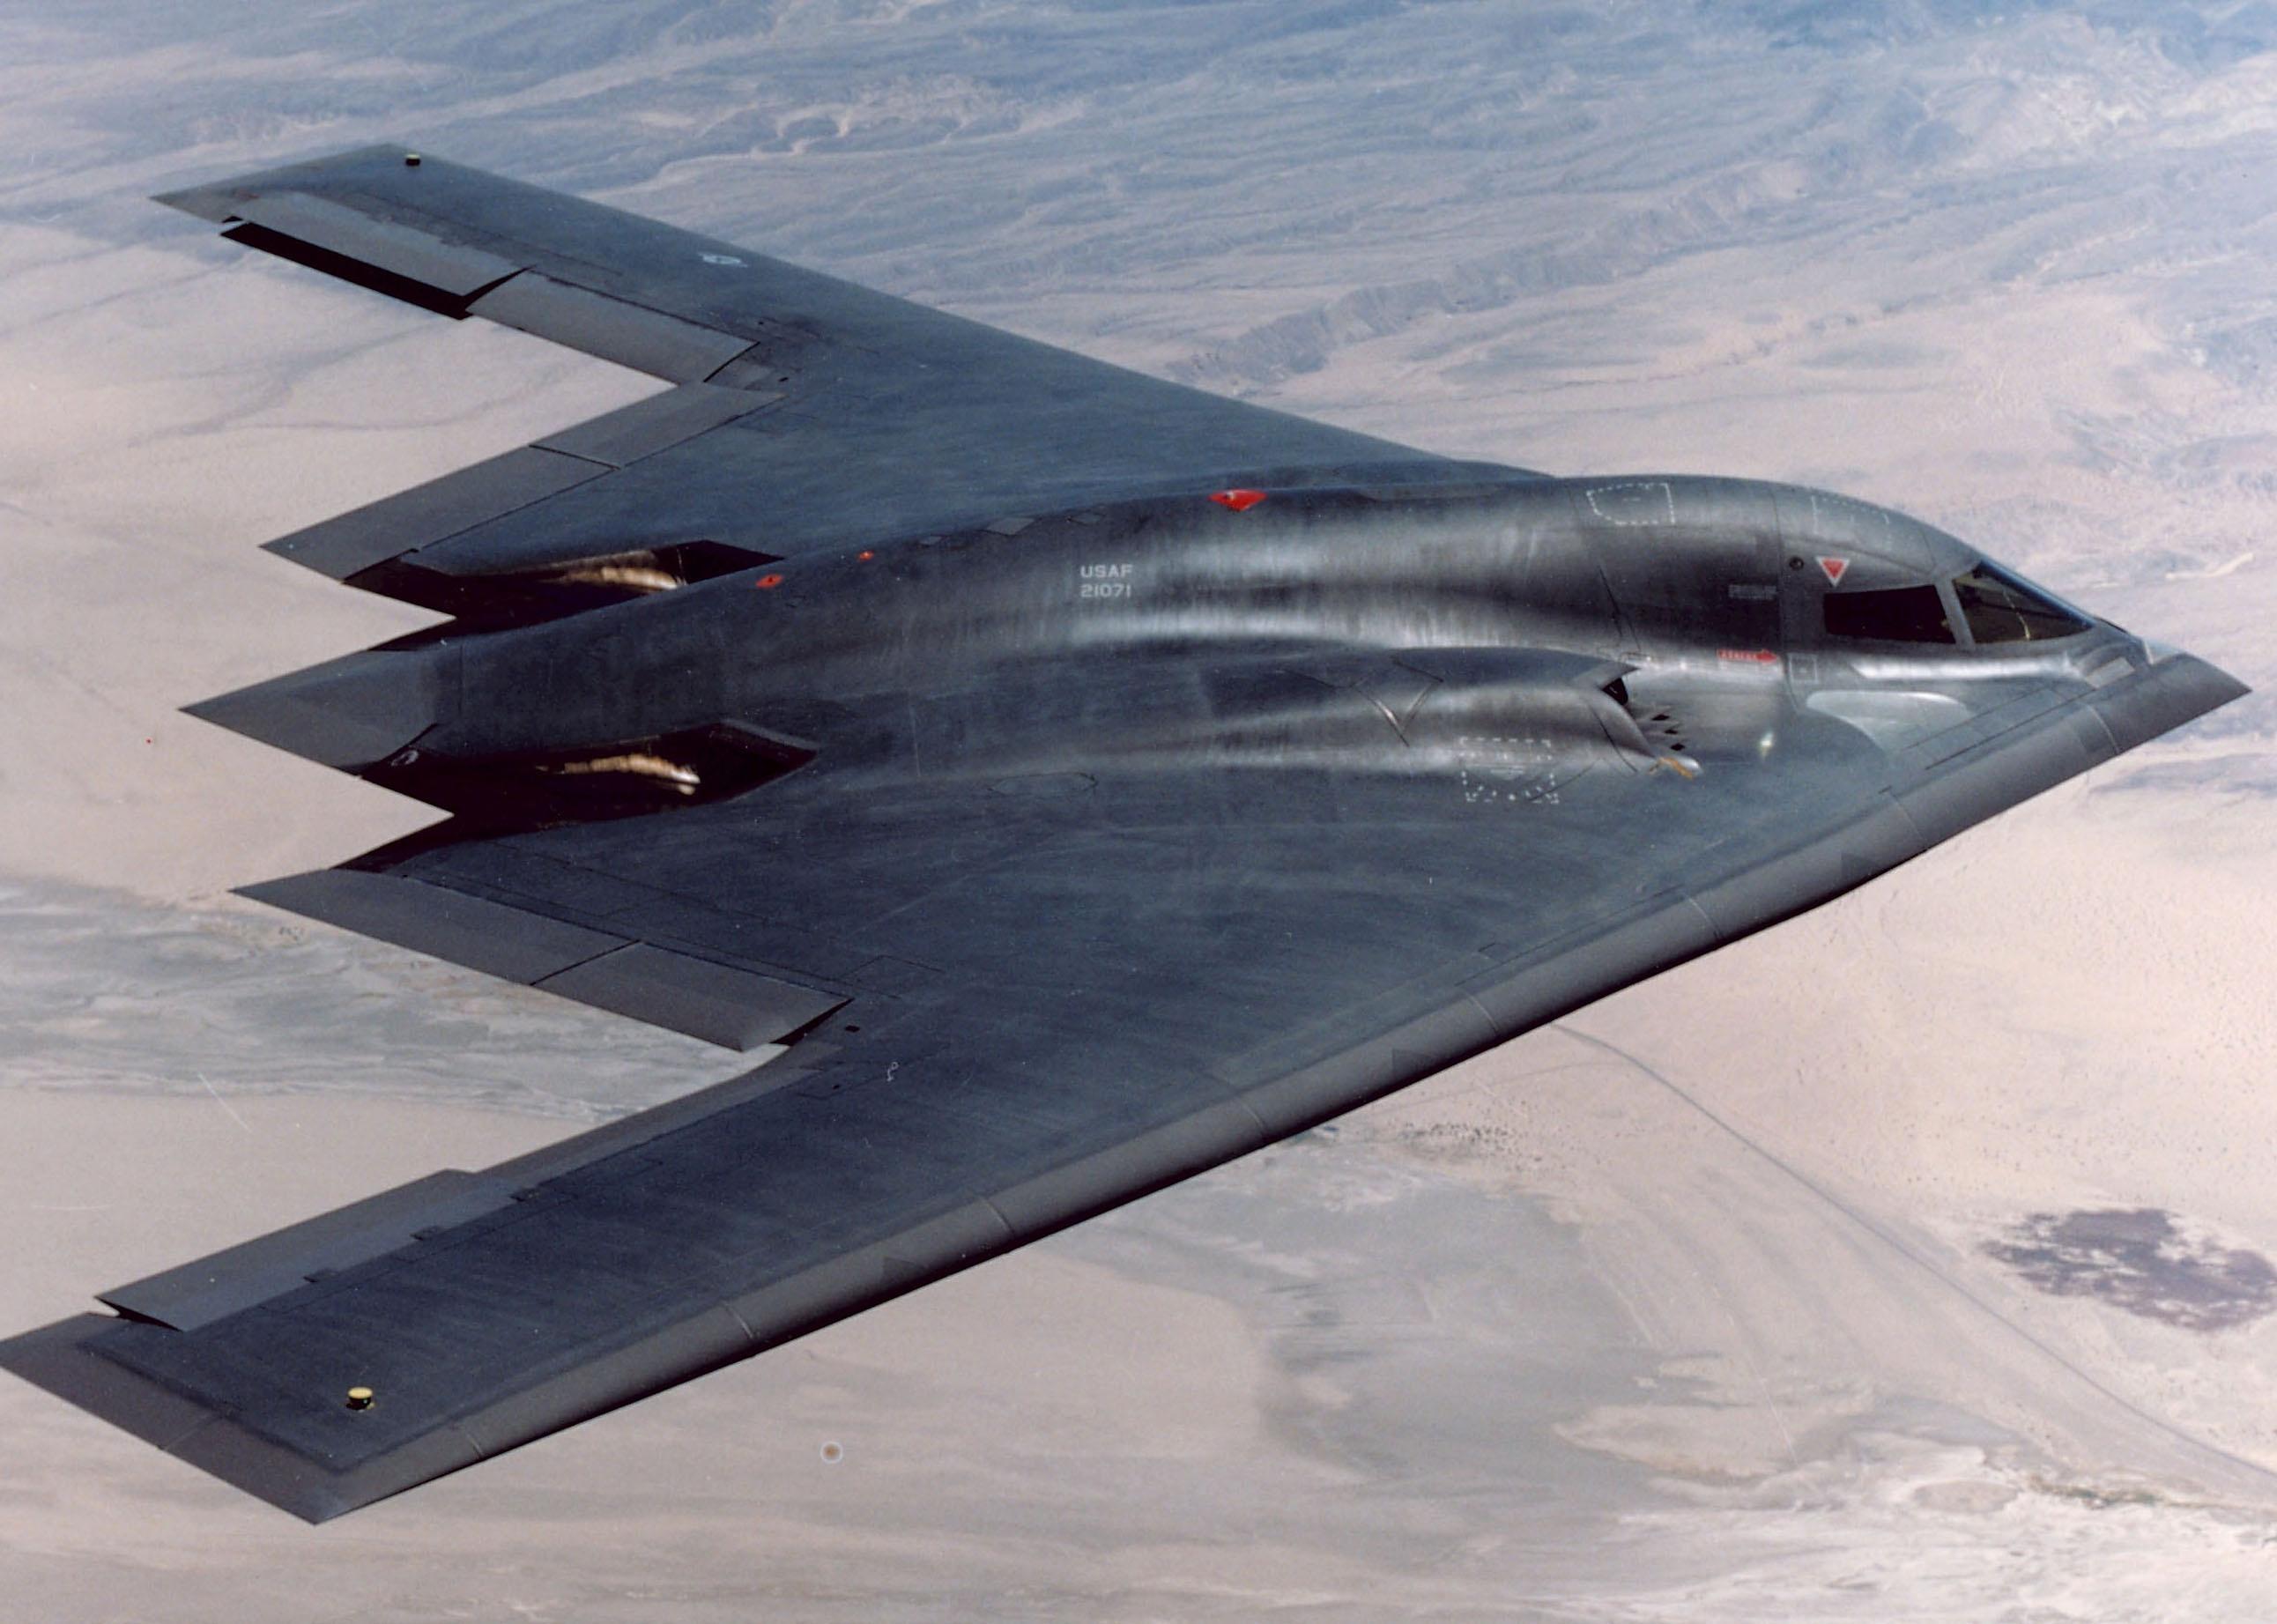 The B-2 Stealth Bomber flies over an Air Force base.